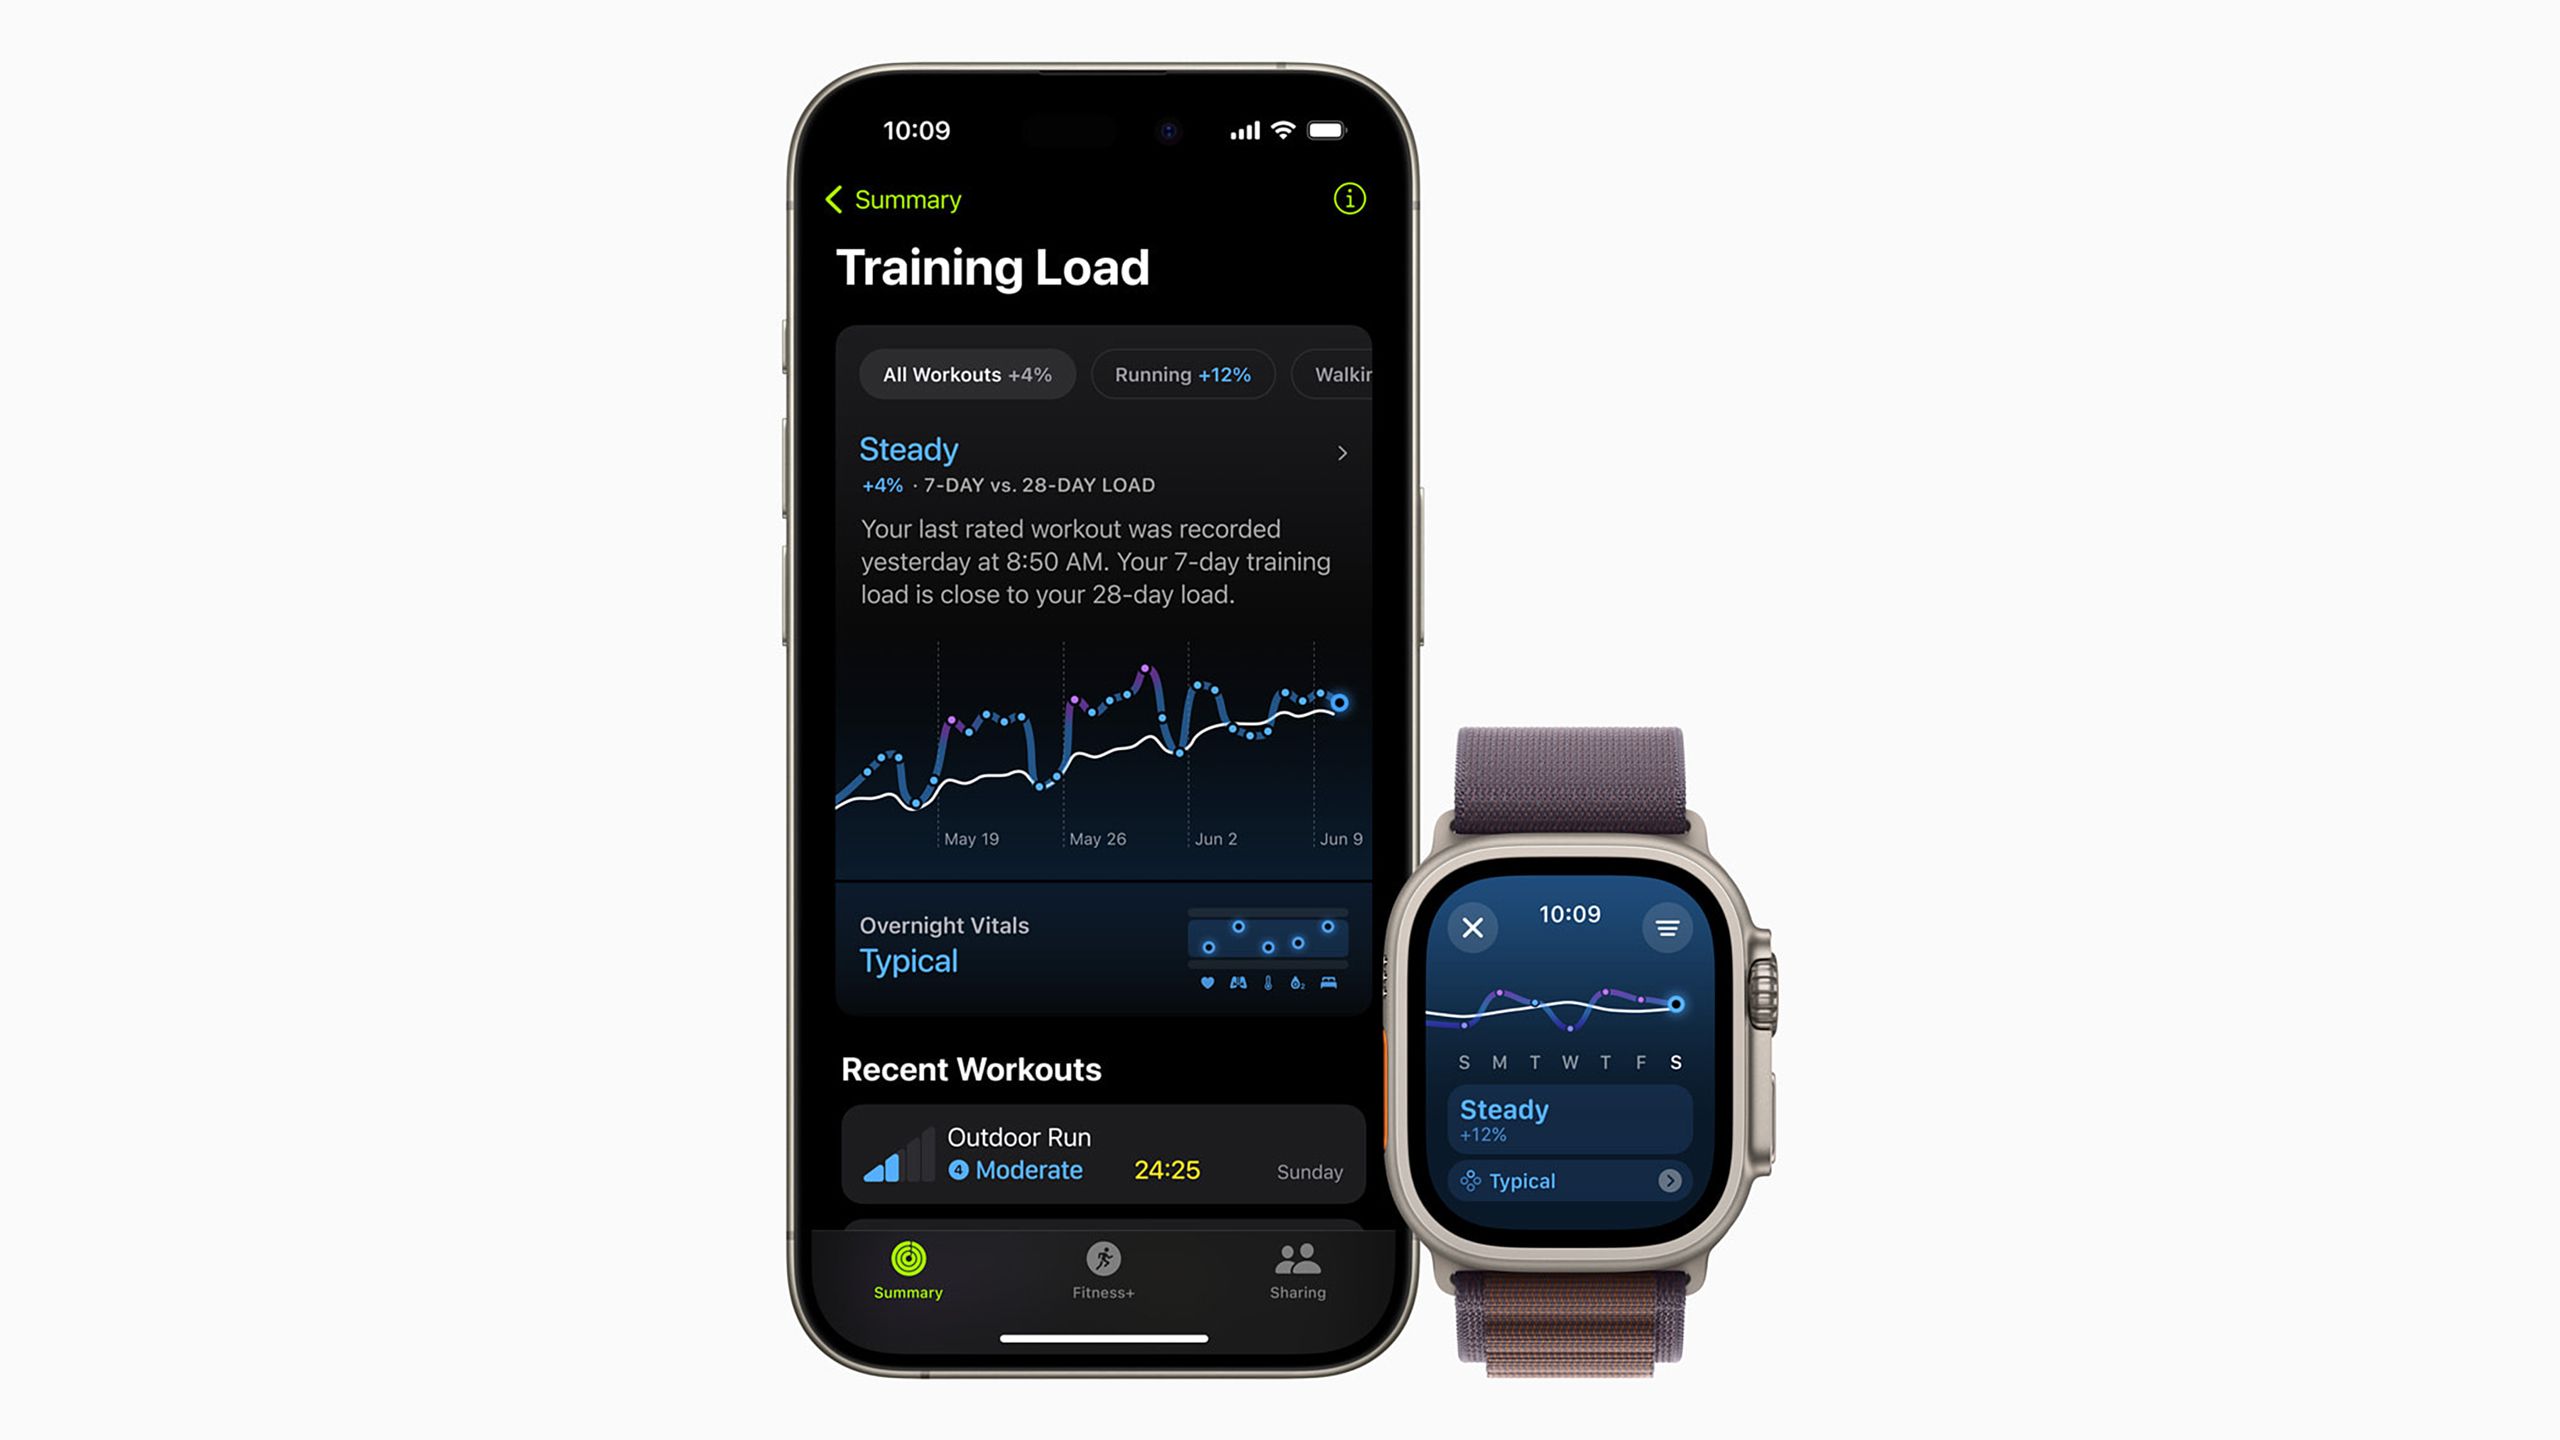 An iPhone sits next to an Apple Watch with the new Training Load tool on both screens.